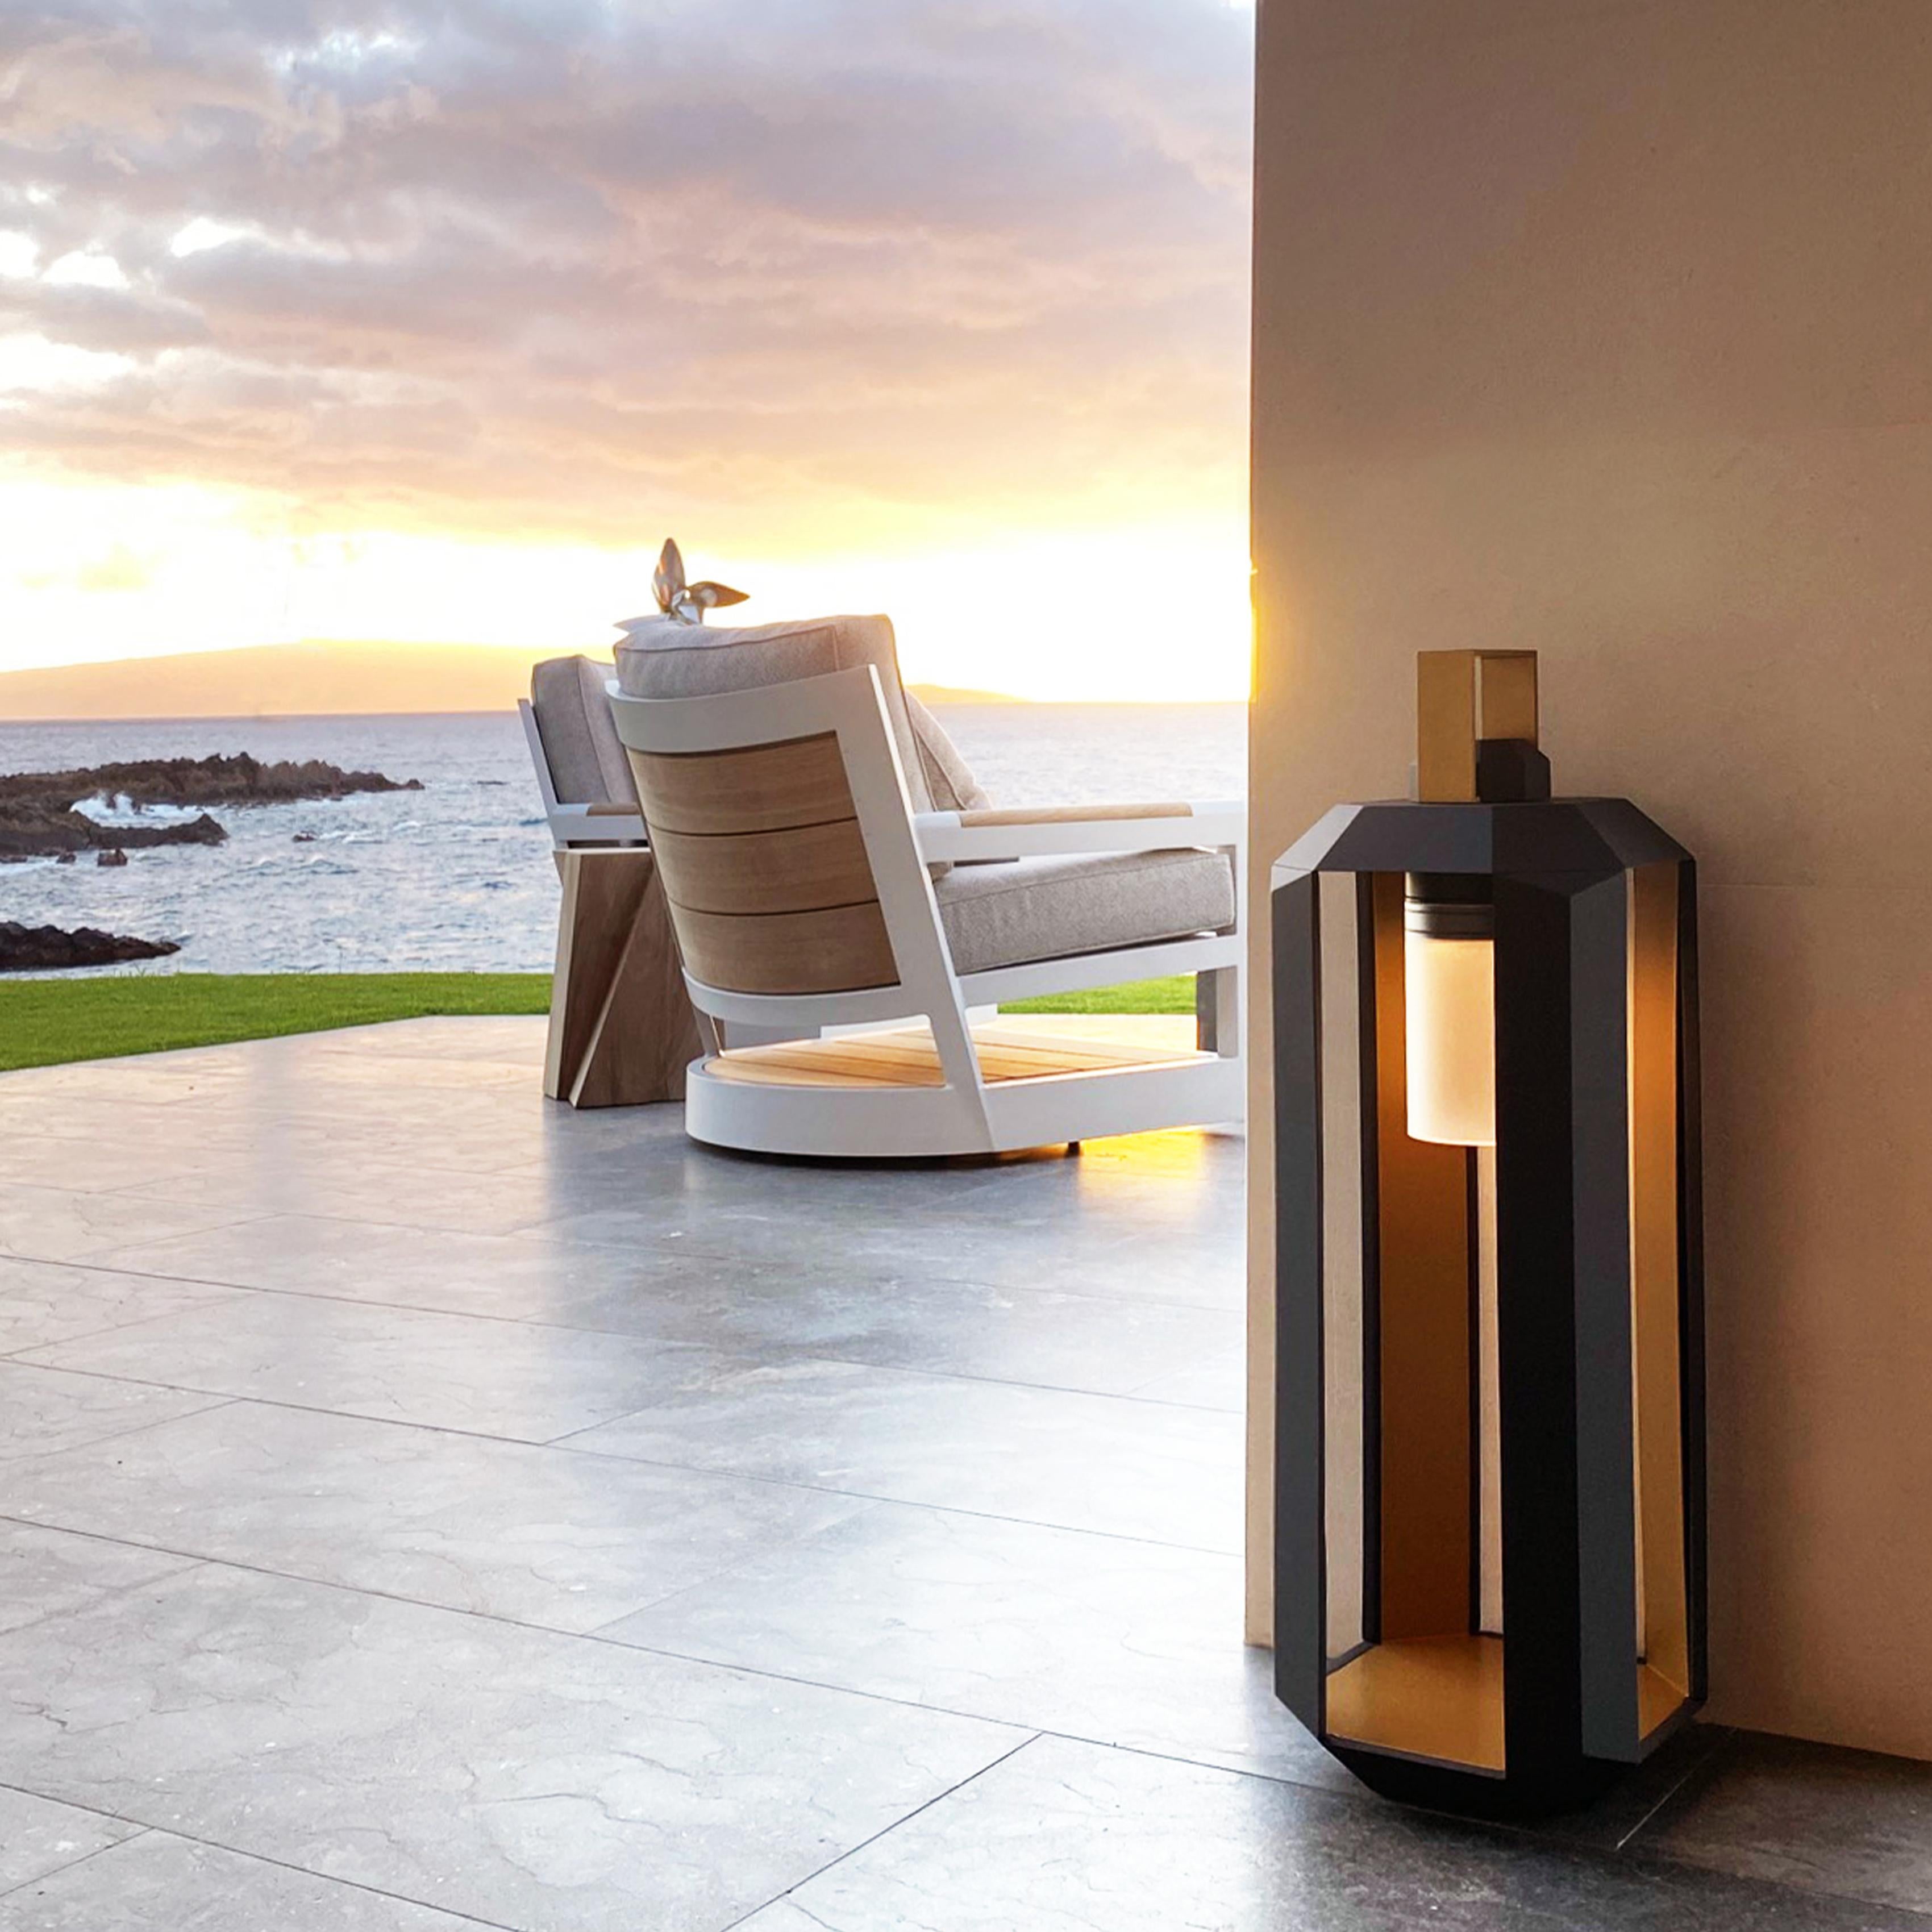 The incarnation of Contardi's philosophy of bringing the interior design to the outside for functional and classy outdoor. Cube now becomes an outdoor lantern in a rechargeable or wired battery version. To switch on the Battery version, it is enough